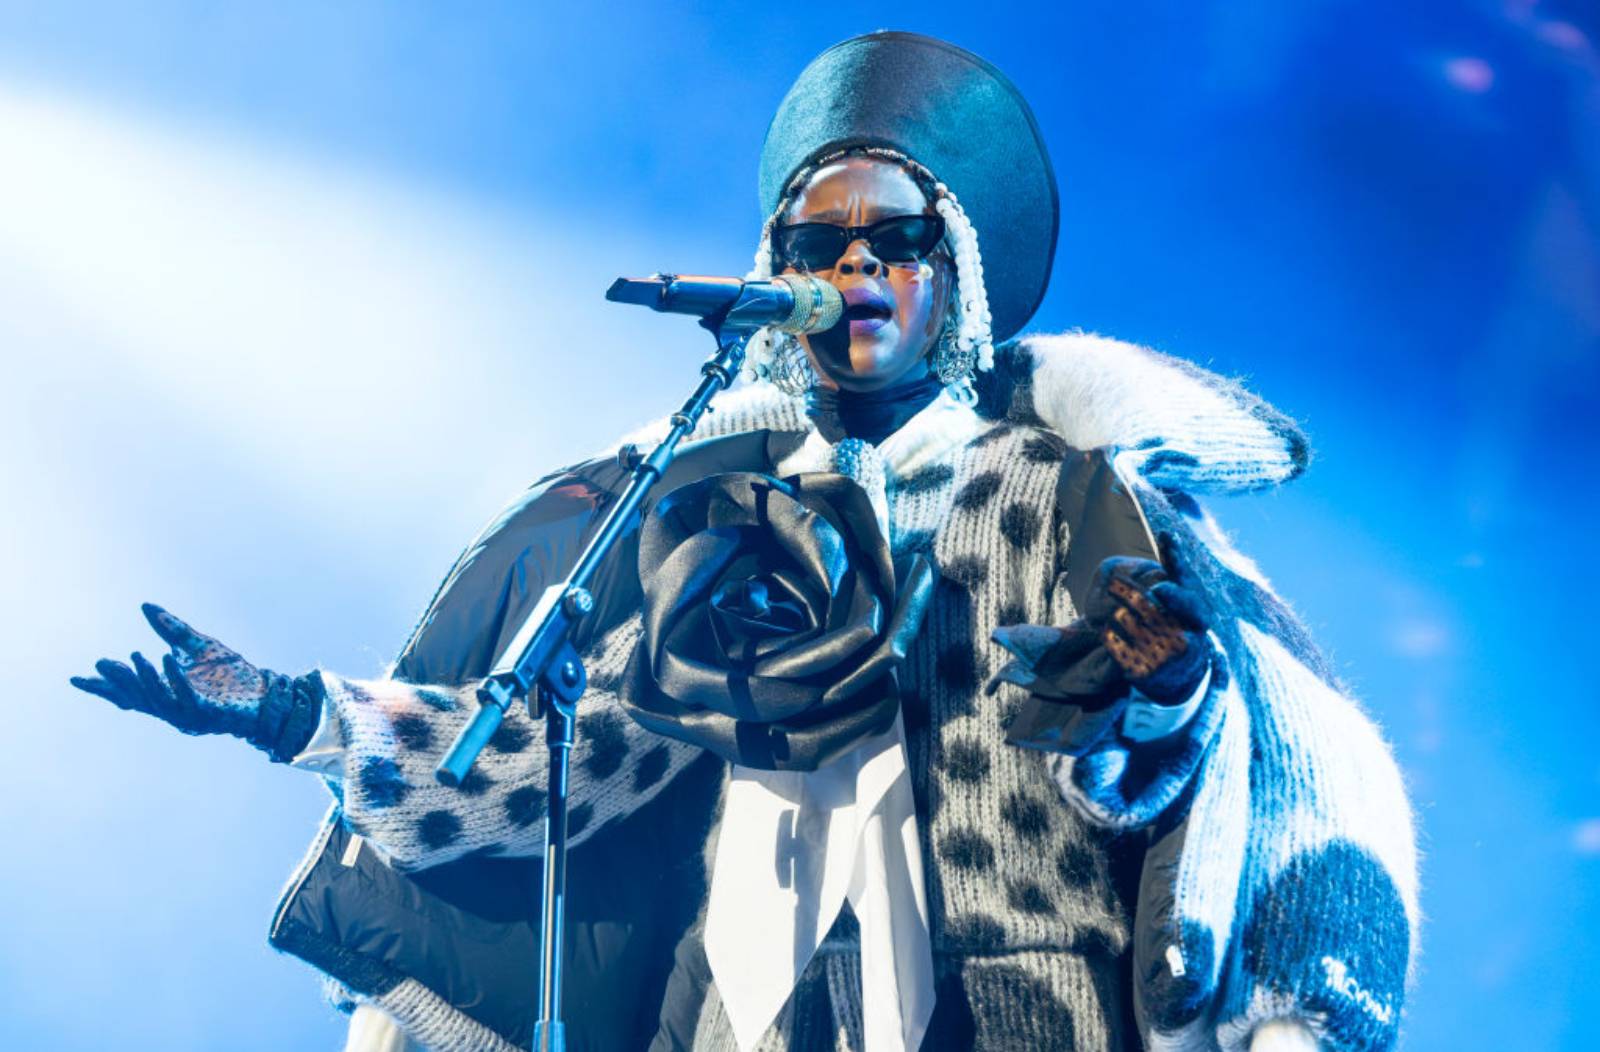 Lauryn Hill performs at Oakland Arena on November 07, 2023 in Oakland, California. (Photo by Steve Jennings/Getty Images)